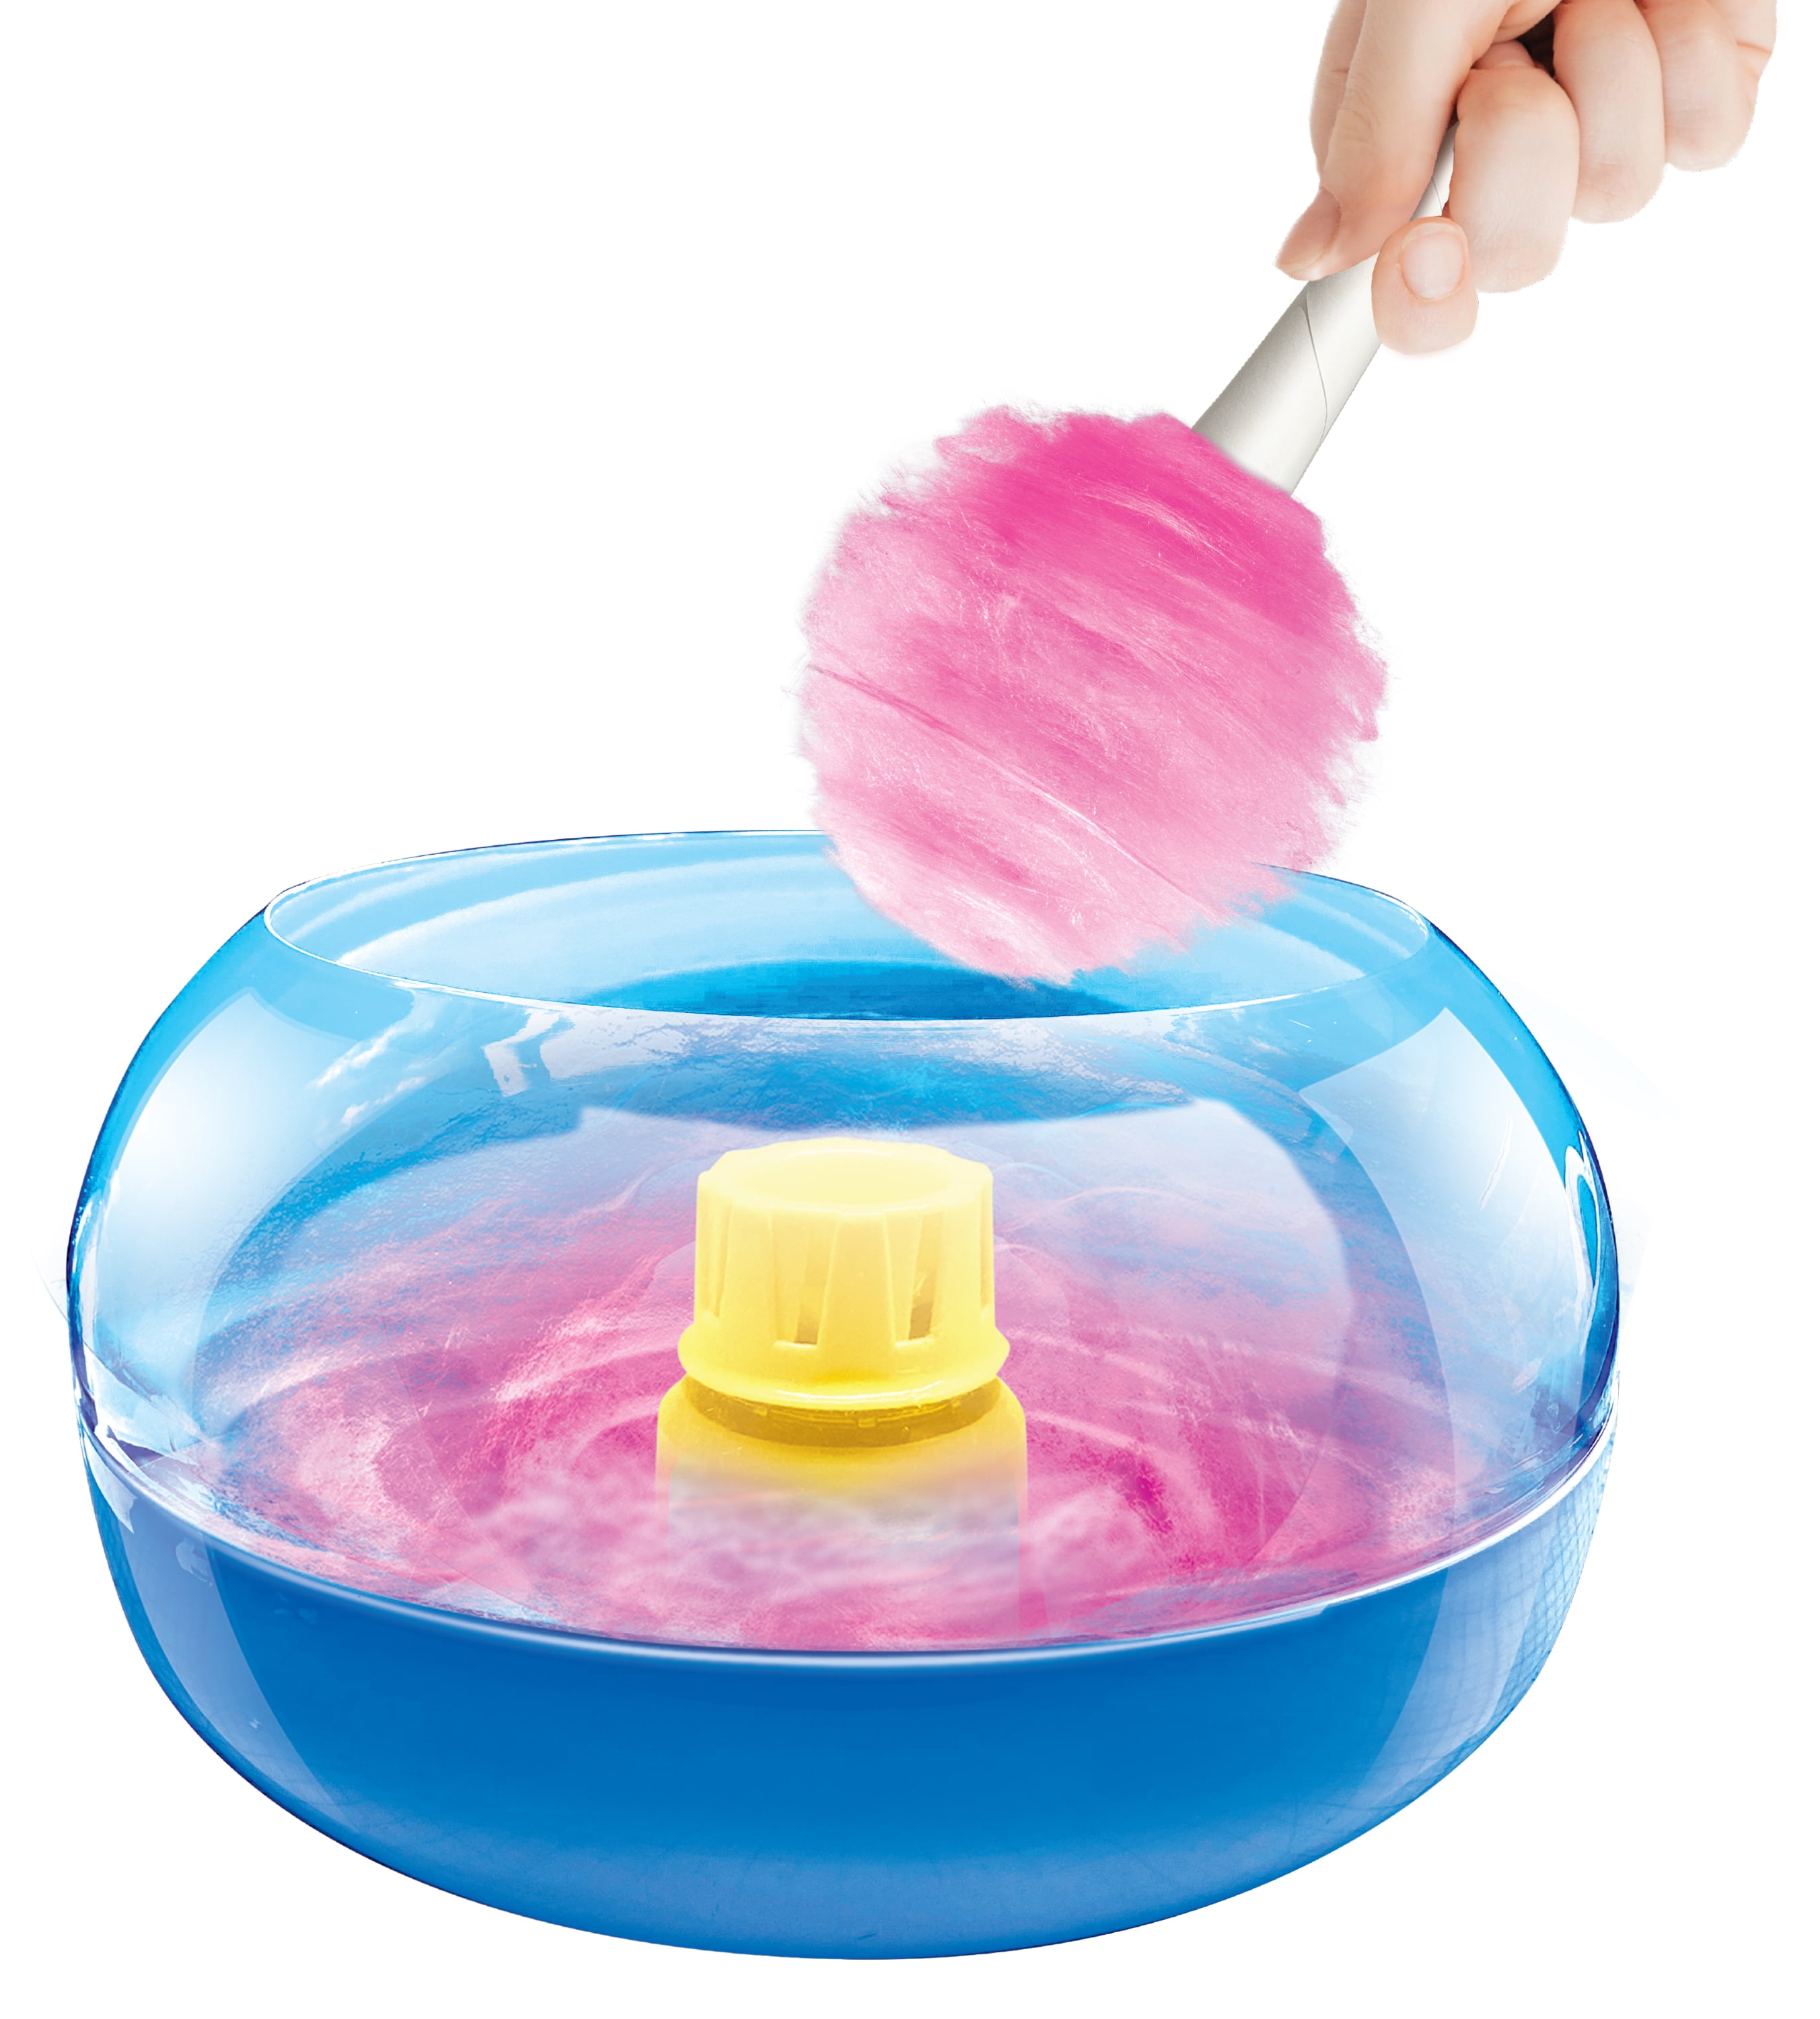 Cra-z-art The Real Cotton Candy Maker : Target